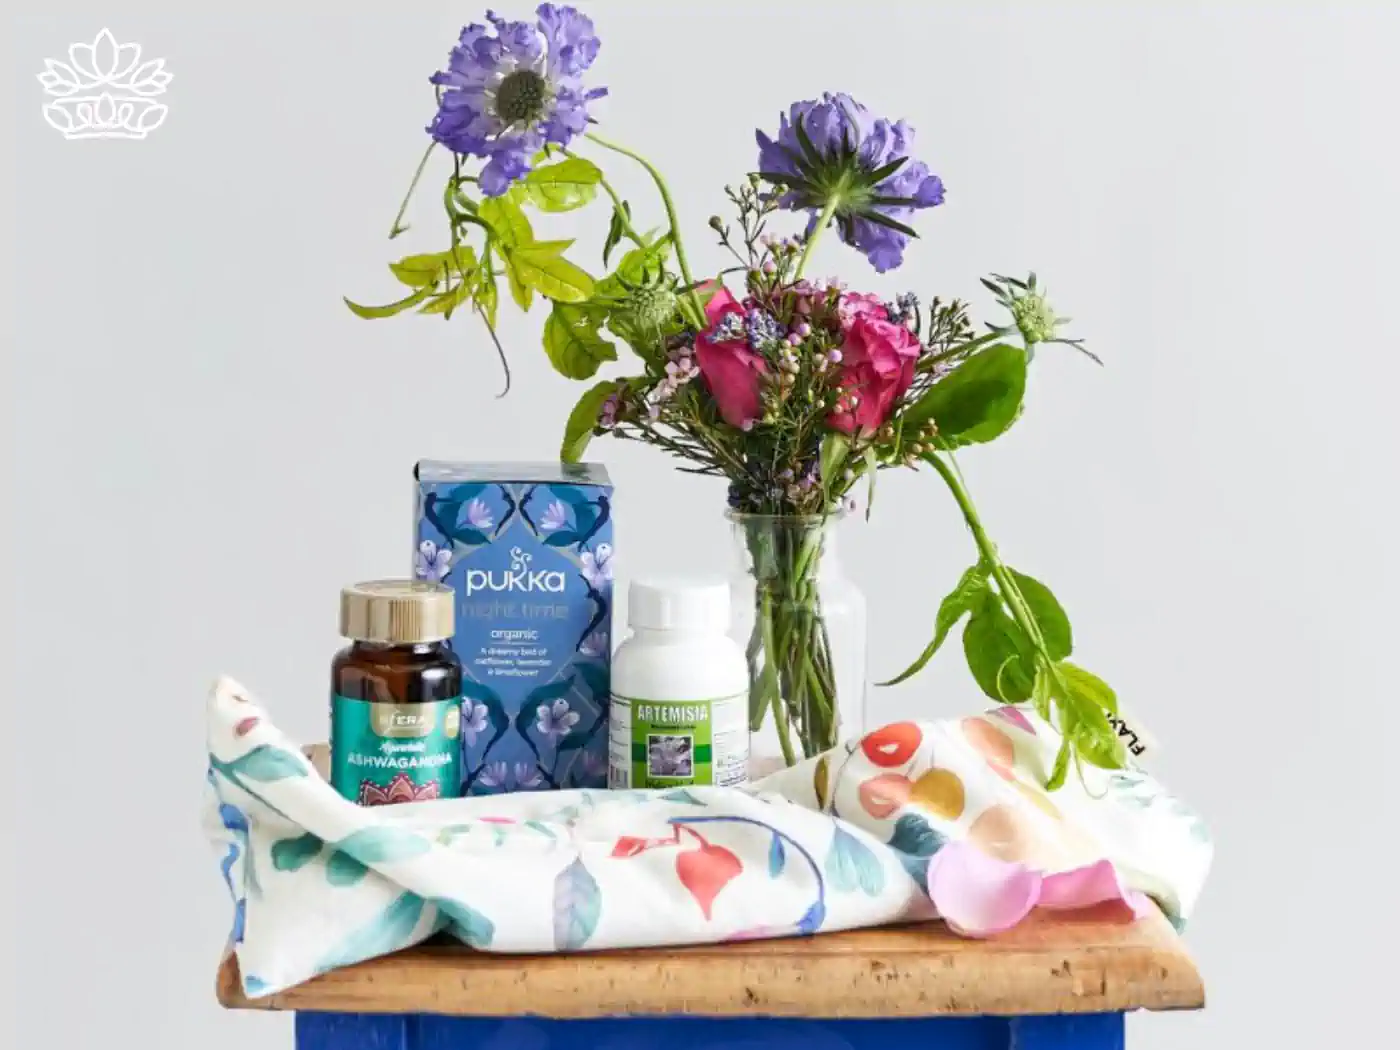 Wellness-themed get well gift box featuring organic tea, ashwagandha supplements, and a bouquet of fresh flowers, thoughtfully arranged to promote relaxation and recovery. Delivered with Heart. Fabulous Flowers and Gifts.